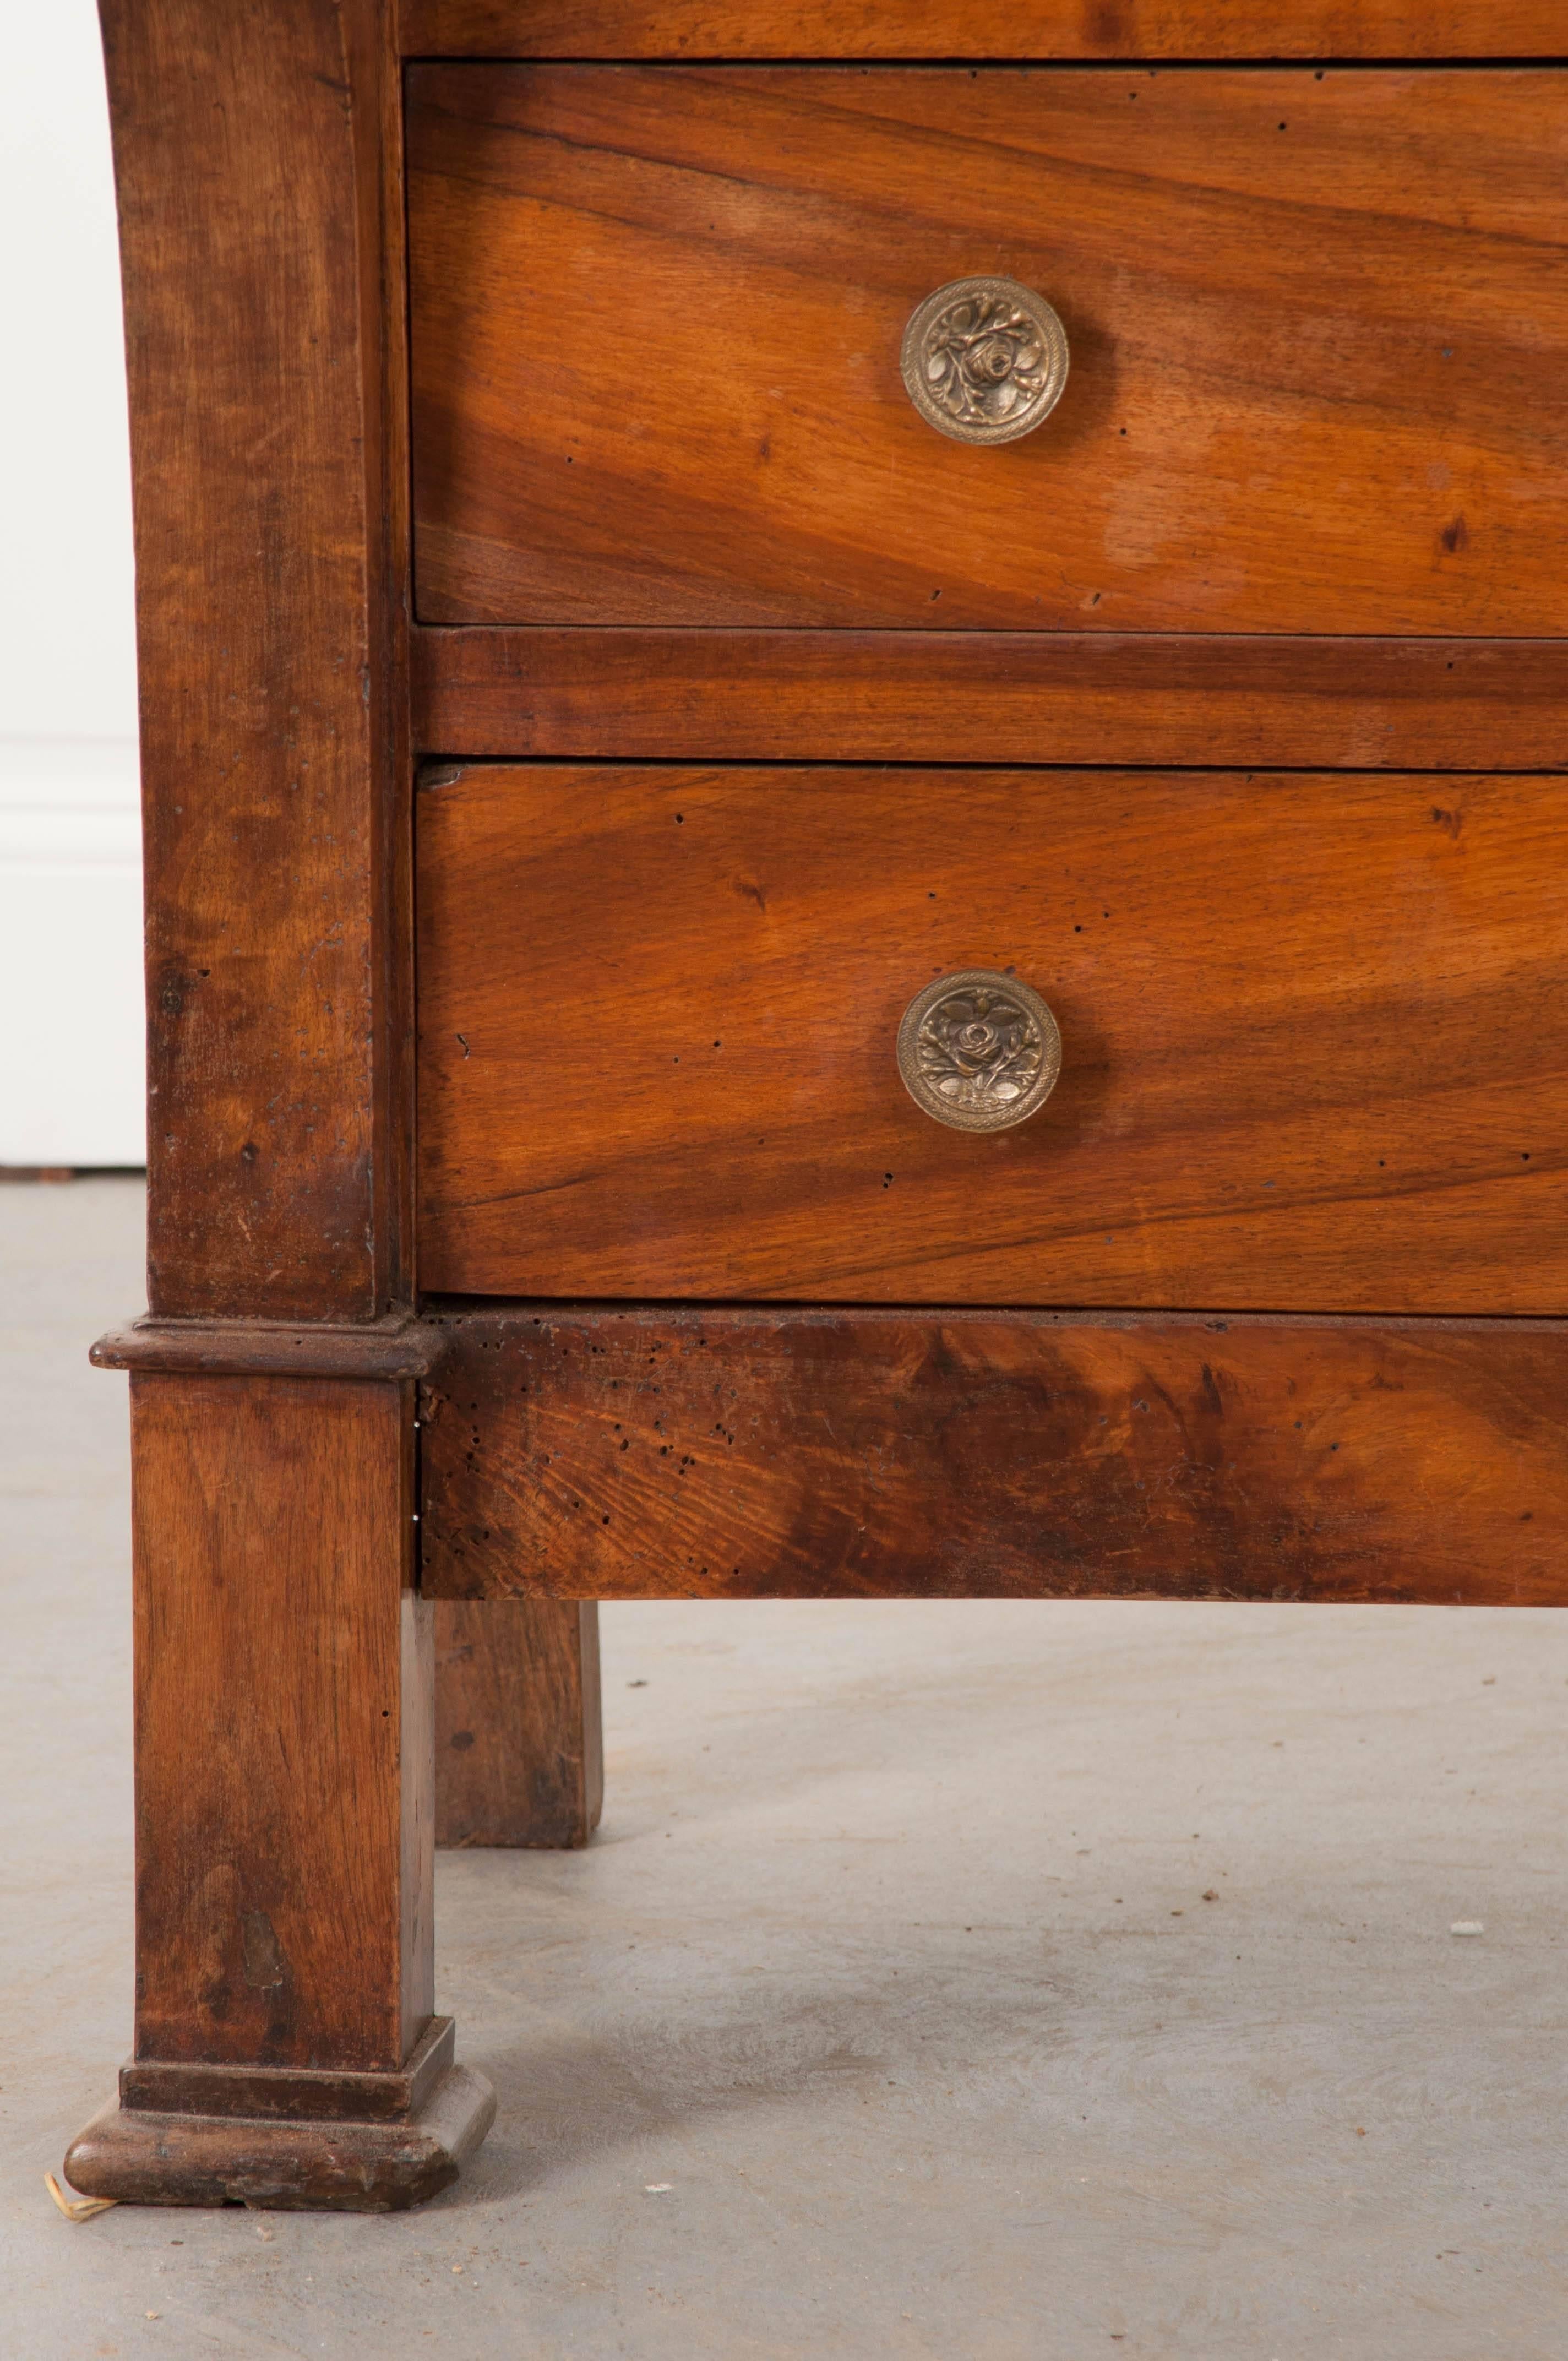 A spectacular four-drawer walnut commode, done in a transitional style, from 19th century France. The chest incorporates elements from the French Empire and Restauration styles. The topmost drawer is hidden in the apron. The lower three each have